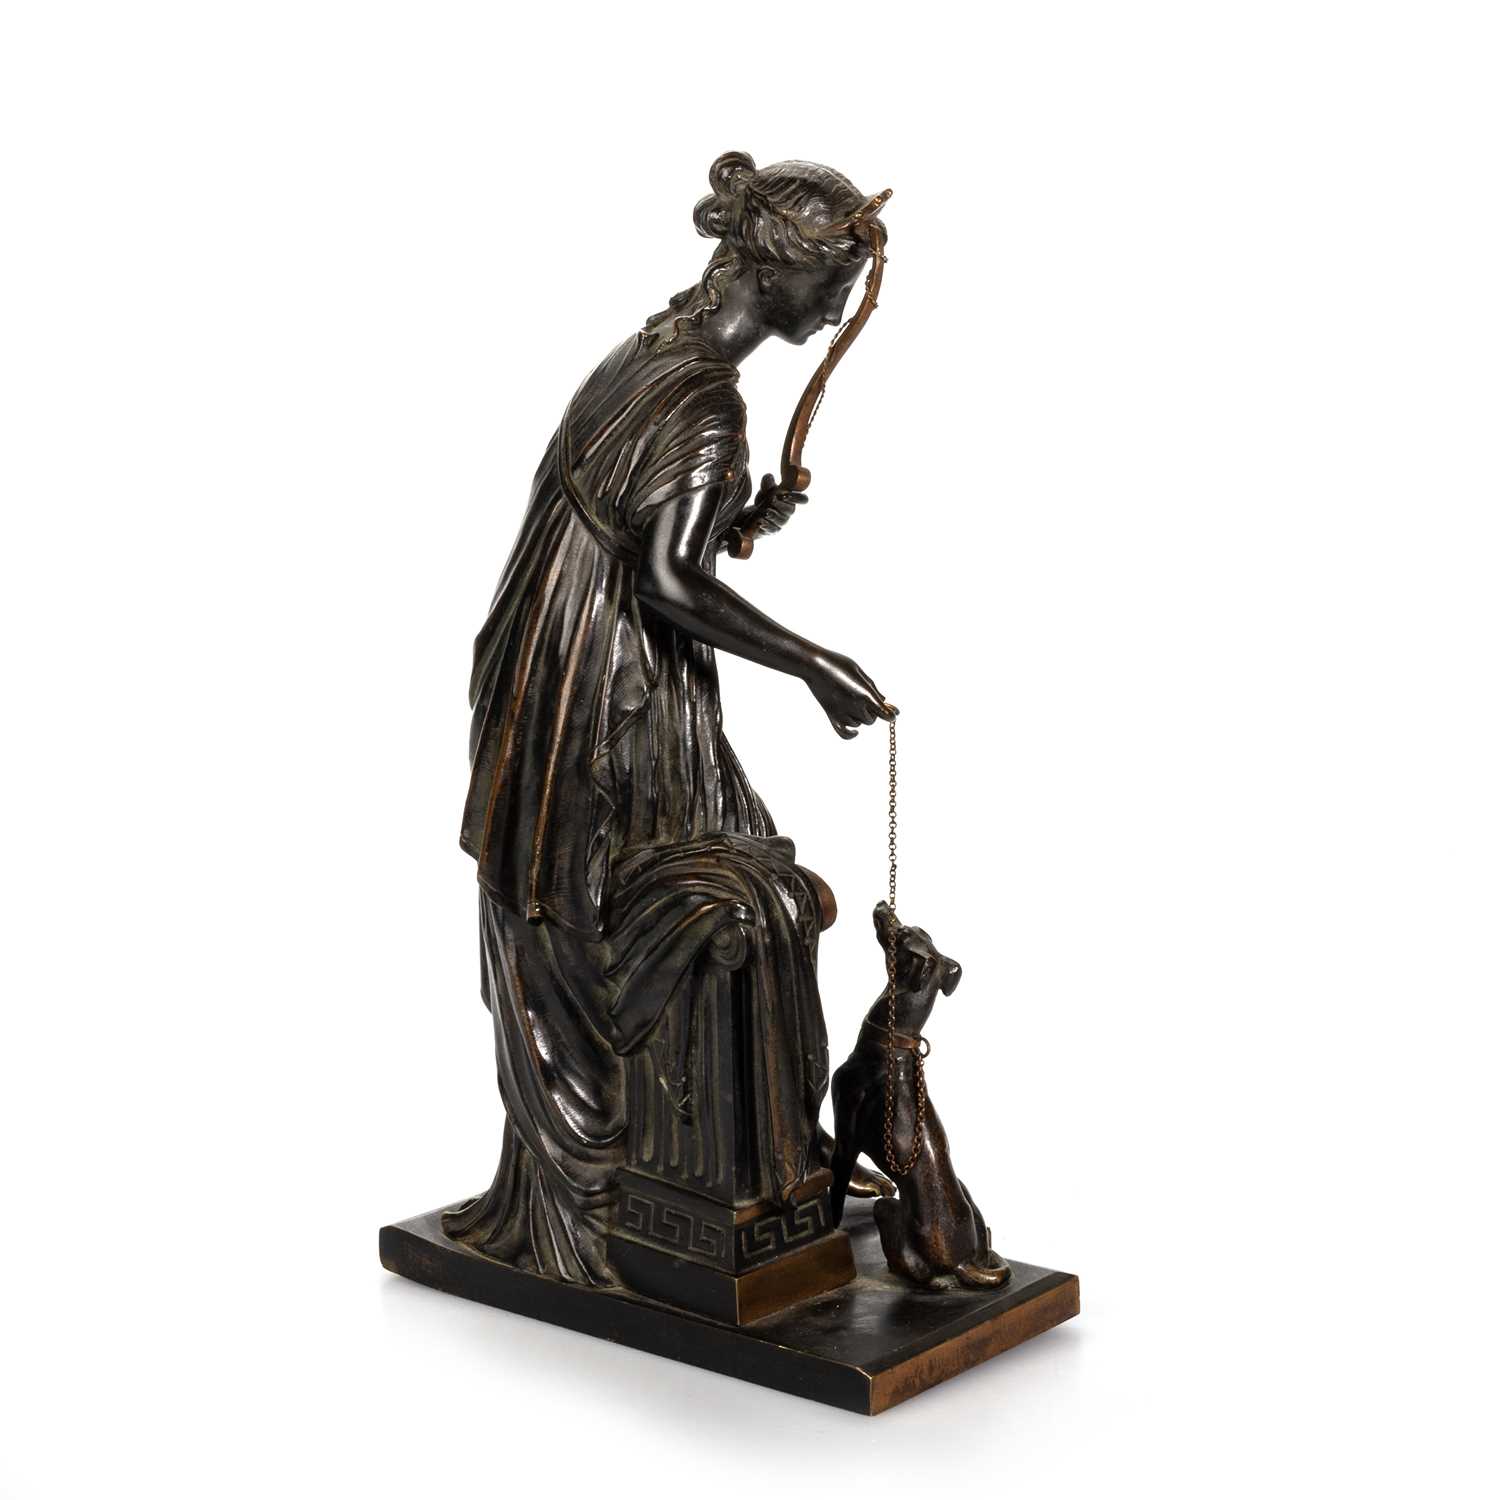 JEAN LOUIS GRÉGOIRE (FRENCH, 1840-1890), DIANA THE HUNTRESS, A BRONZE FIGURE - Image 3 of 3